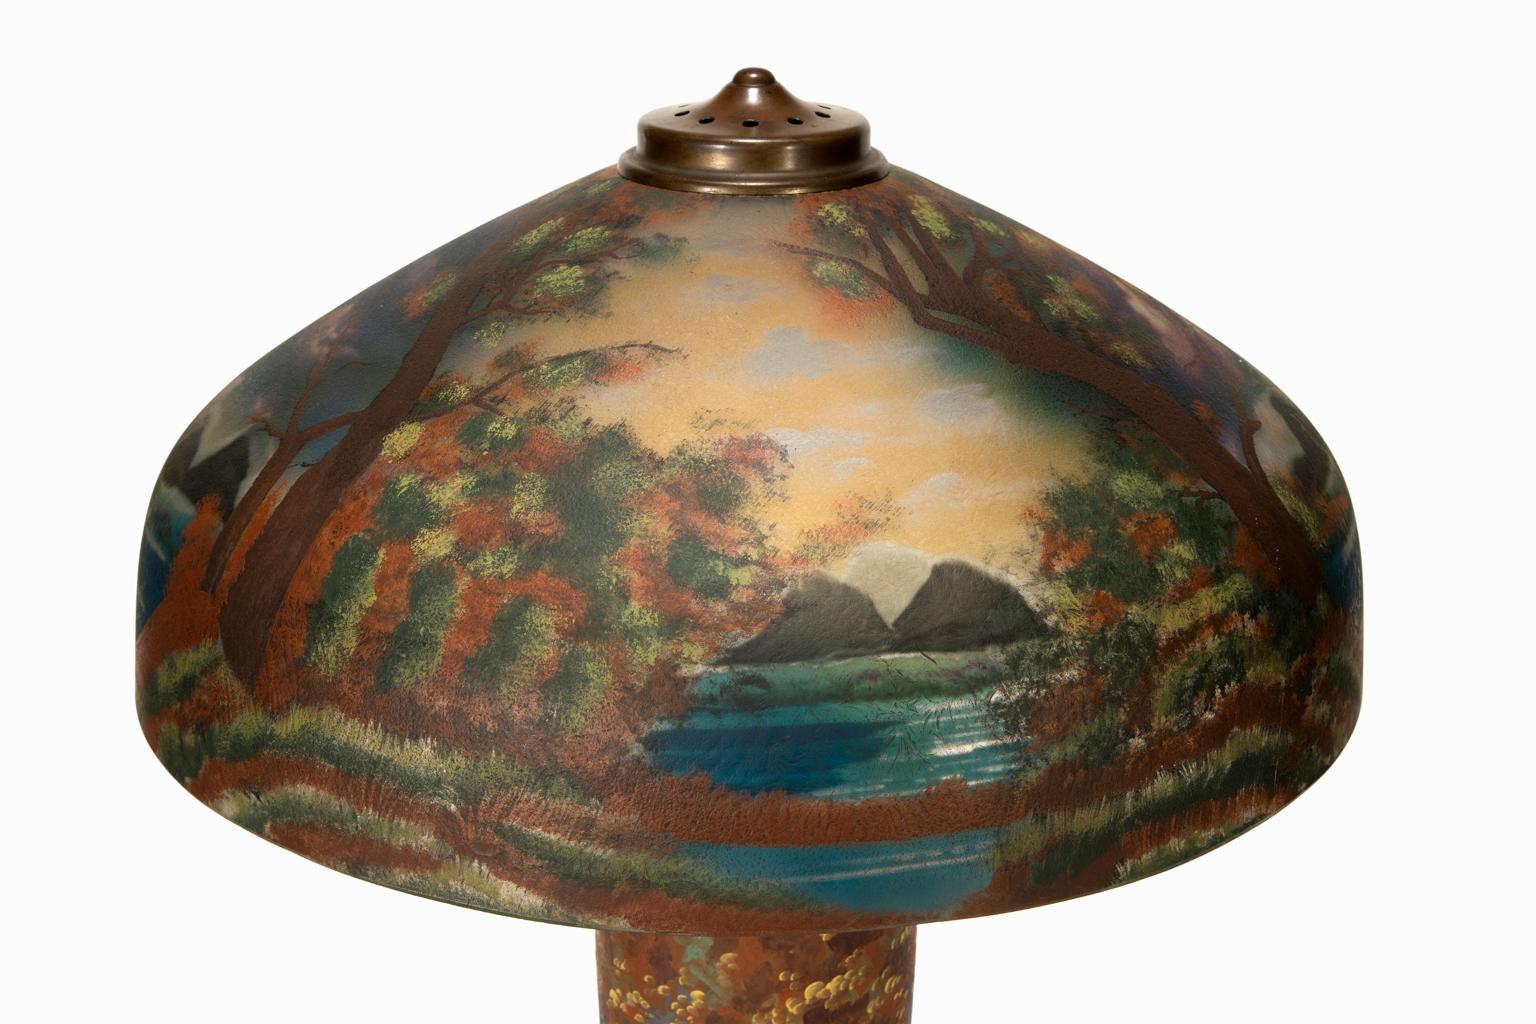 Pittsburgh Glass Company Nicolas Kopp Reverse Glass Painting Shade & Lamp  In Excellent Condition For Sale In Bloomfield Hills, MI